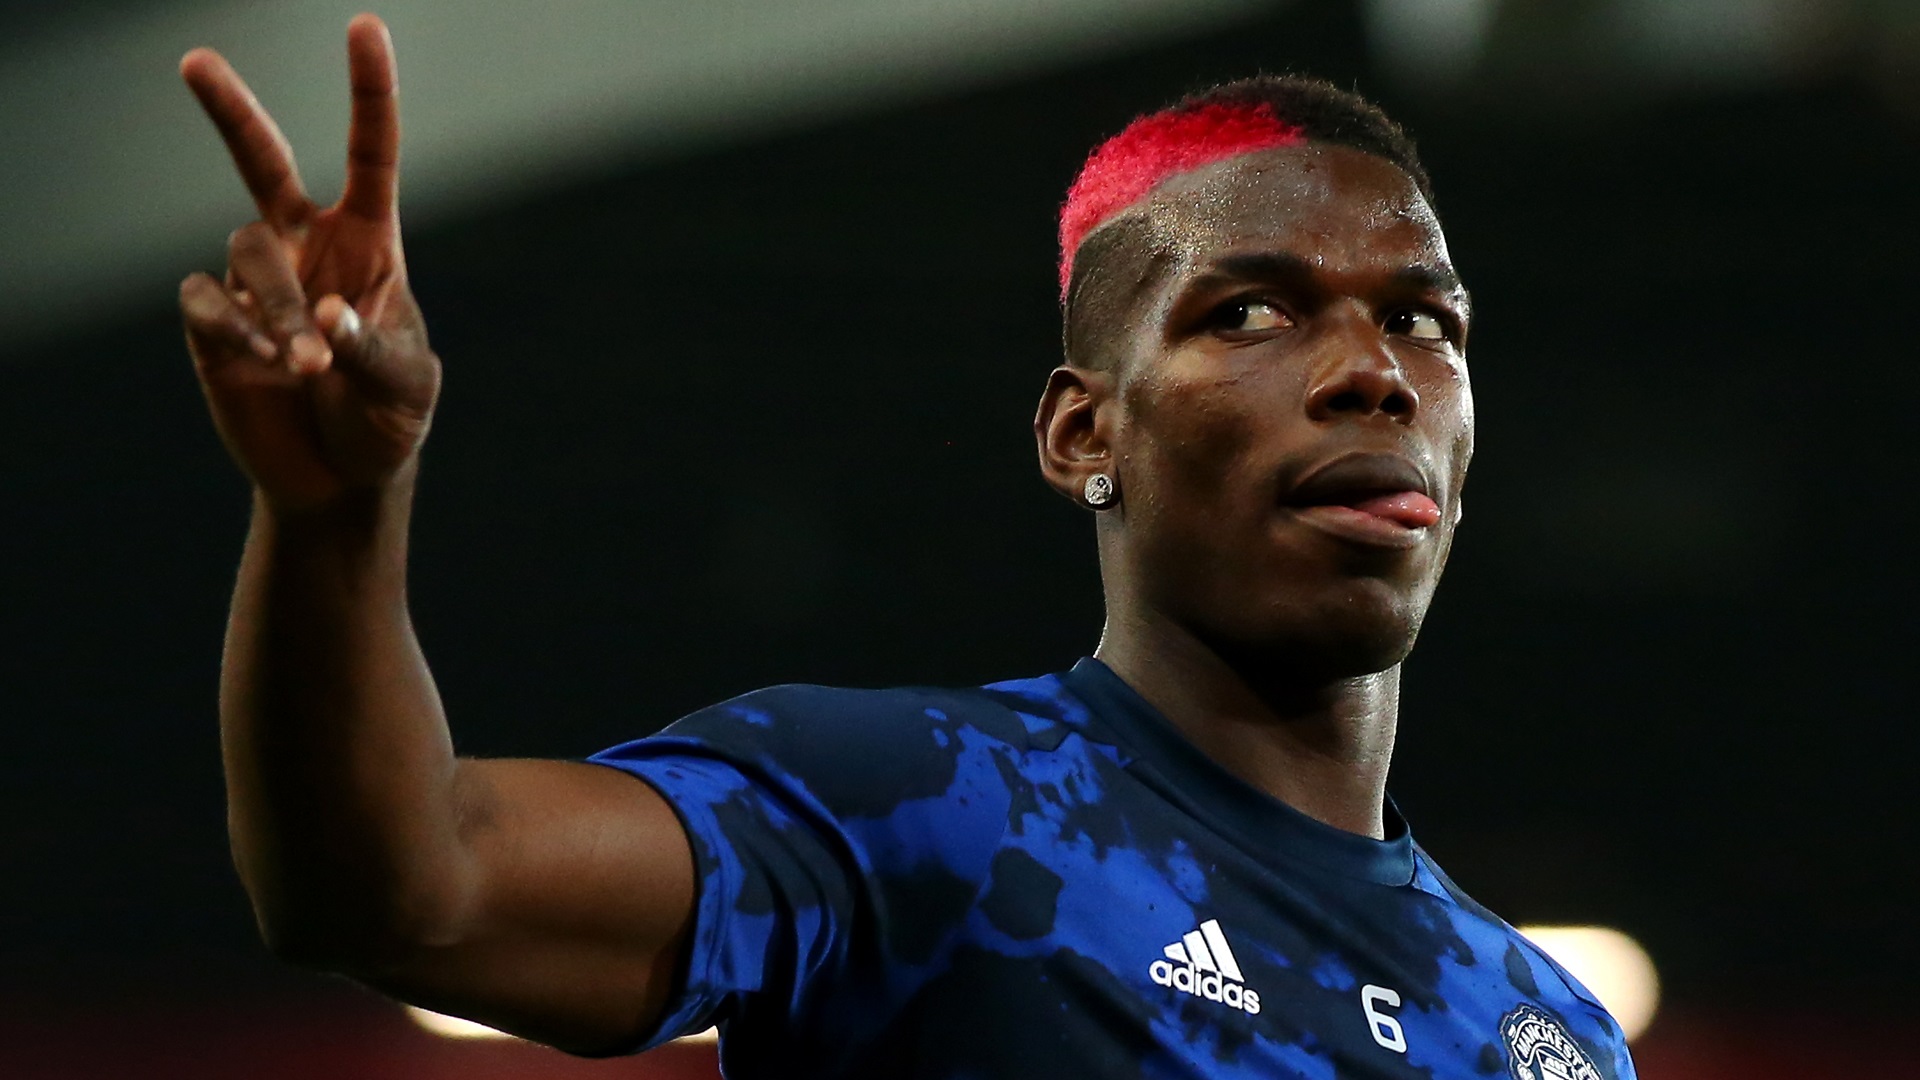 Raiola says 'best midfielder in the world' Pogba wants to stay at Man Utd after Real Madrid interest